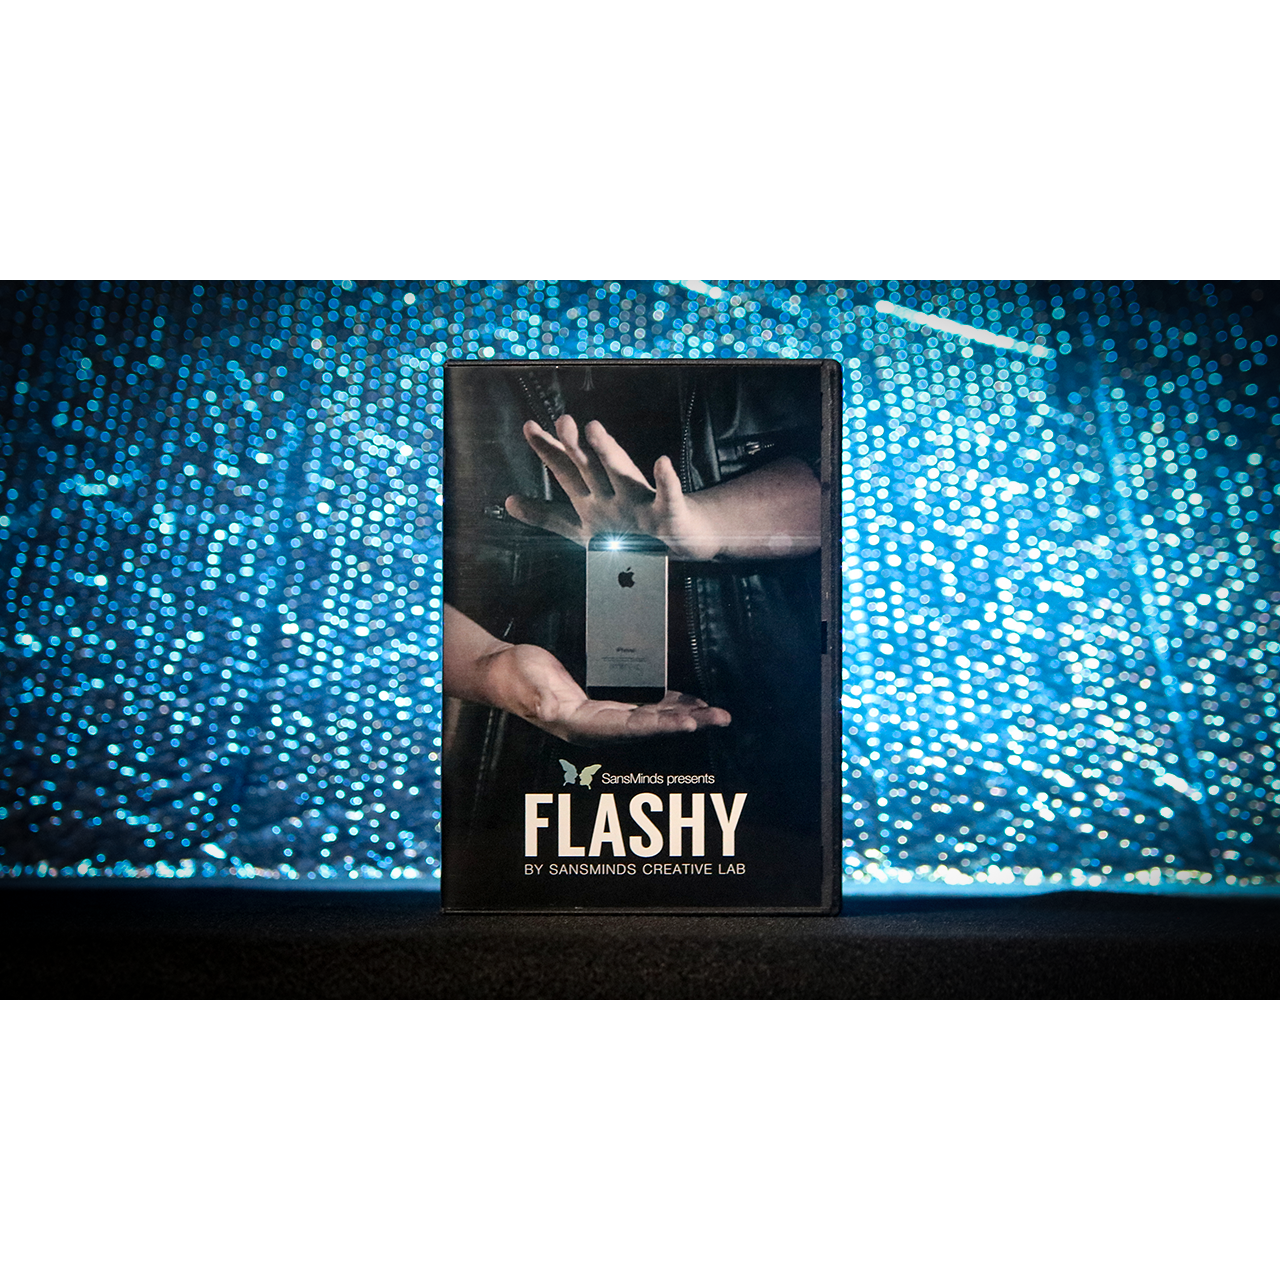 Flashy (DVD and Gimmick) by SansMinds Creative Lab DVD